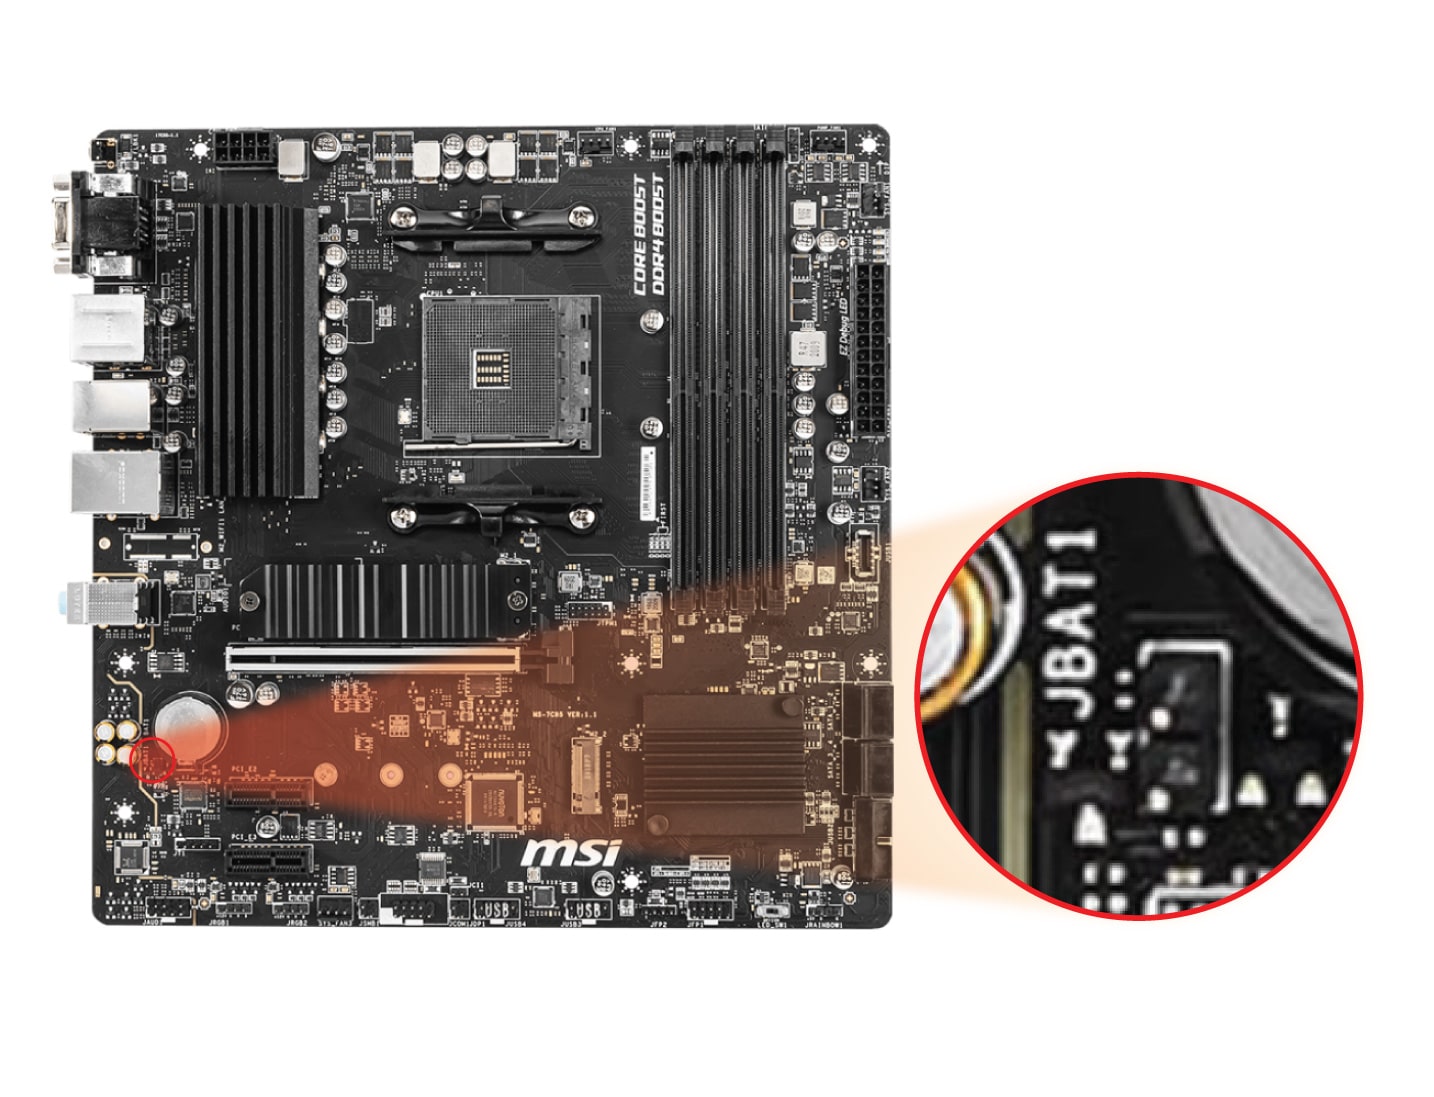 Showing CMOS jumper location on MSI B550M PRO-VDH (&WiFi) motherboard.